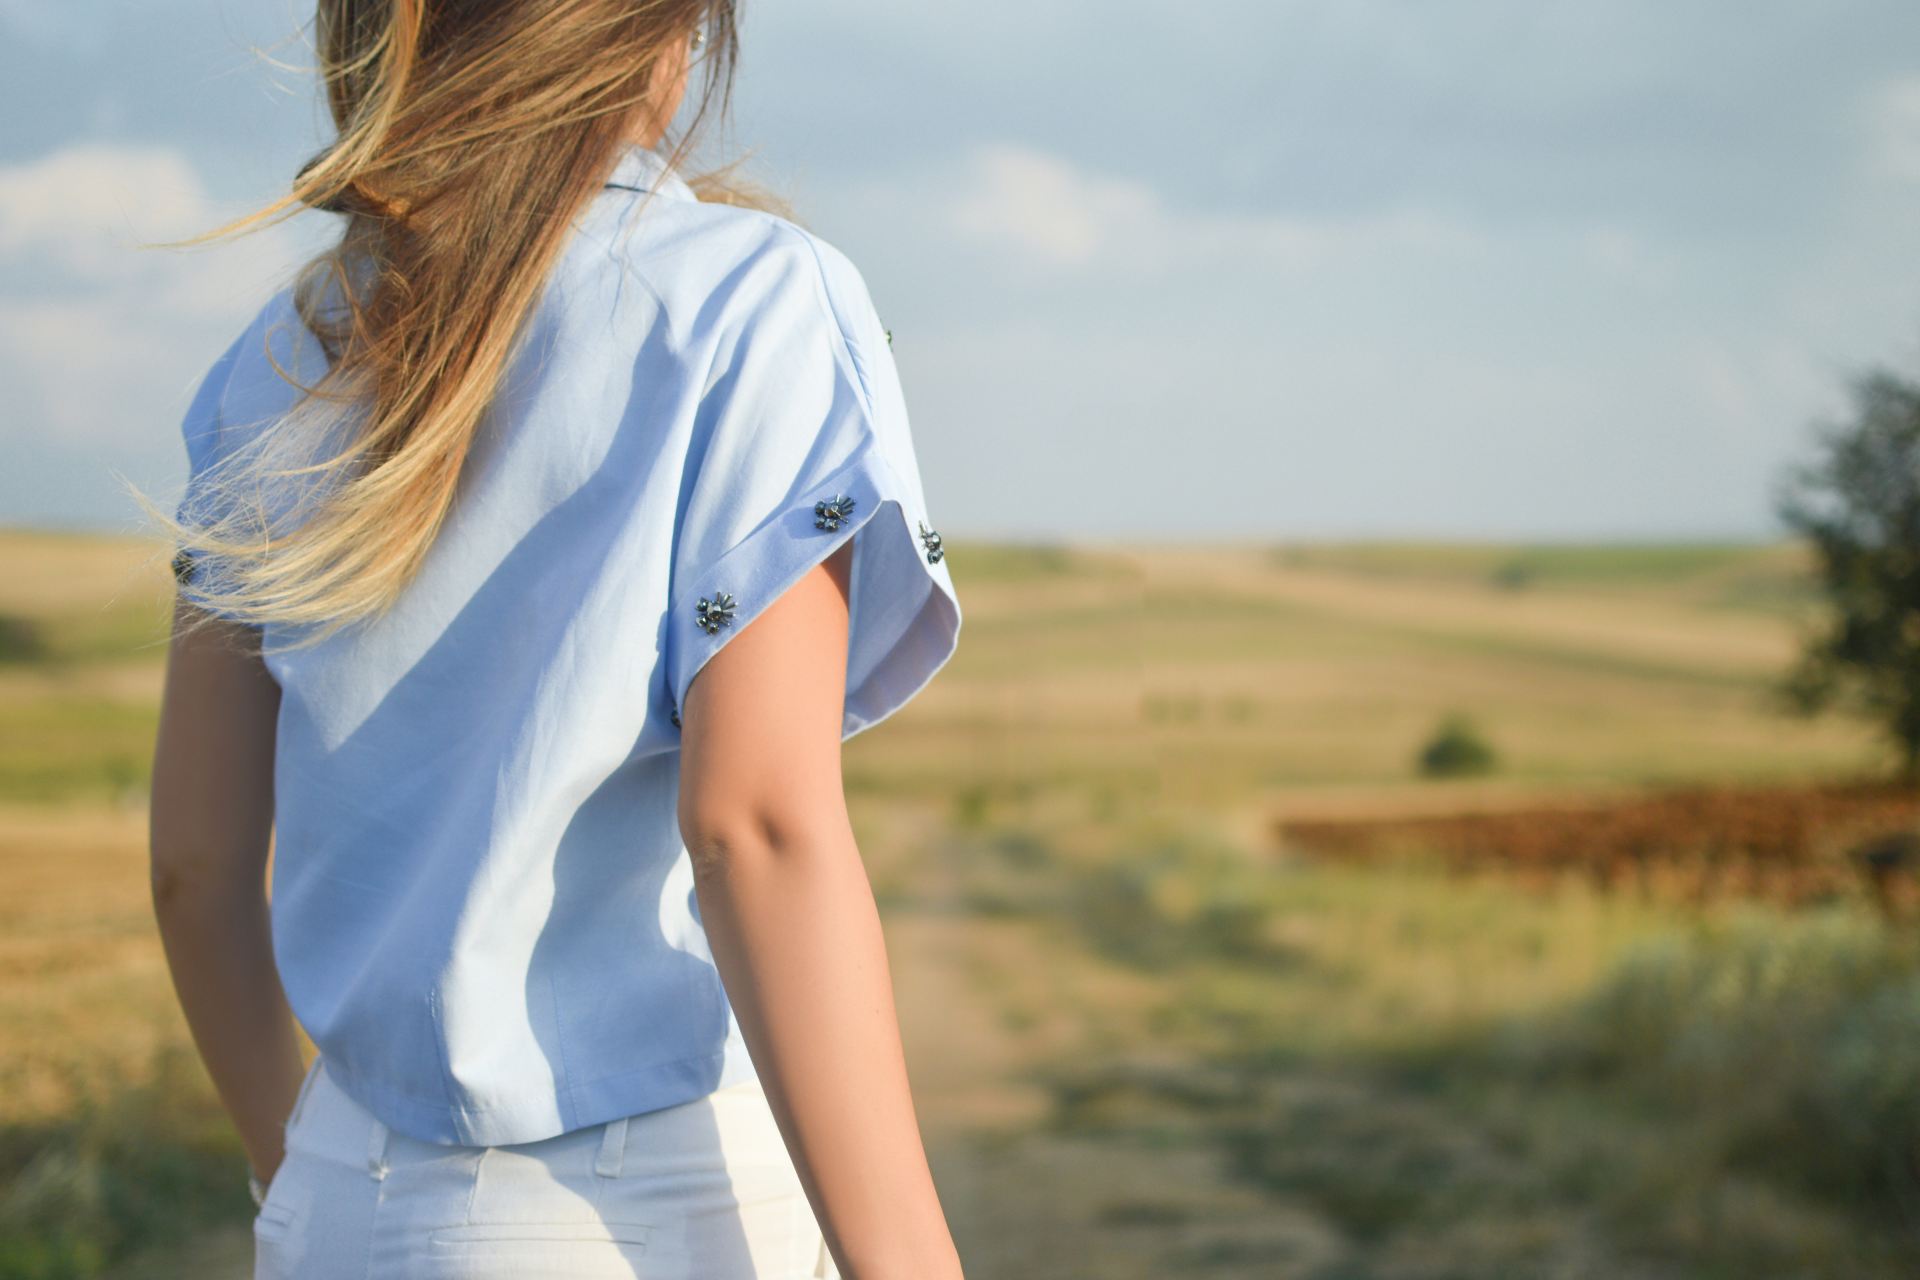 woman wearing white dress shirt standing on green grass field during day time